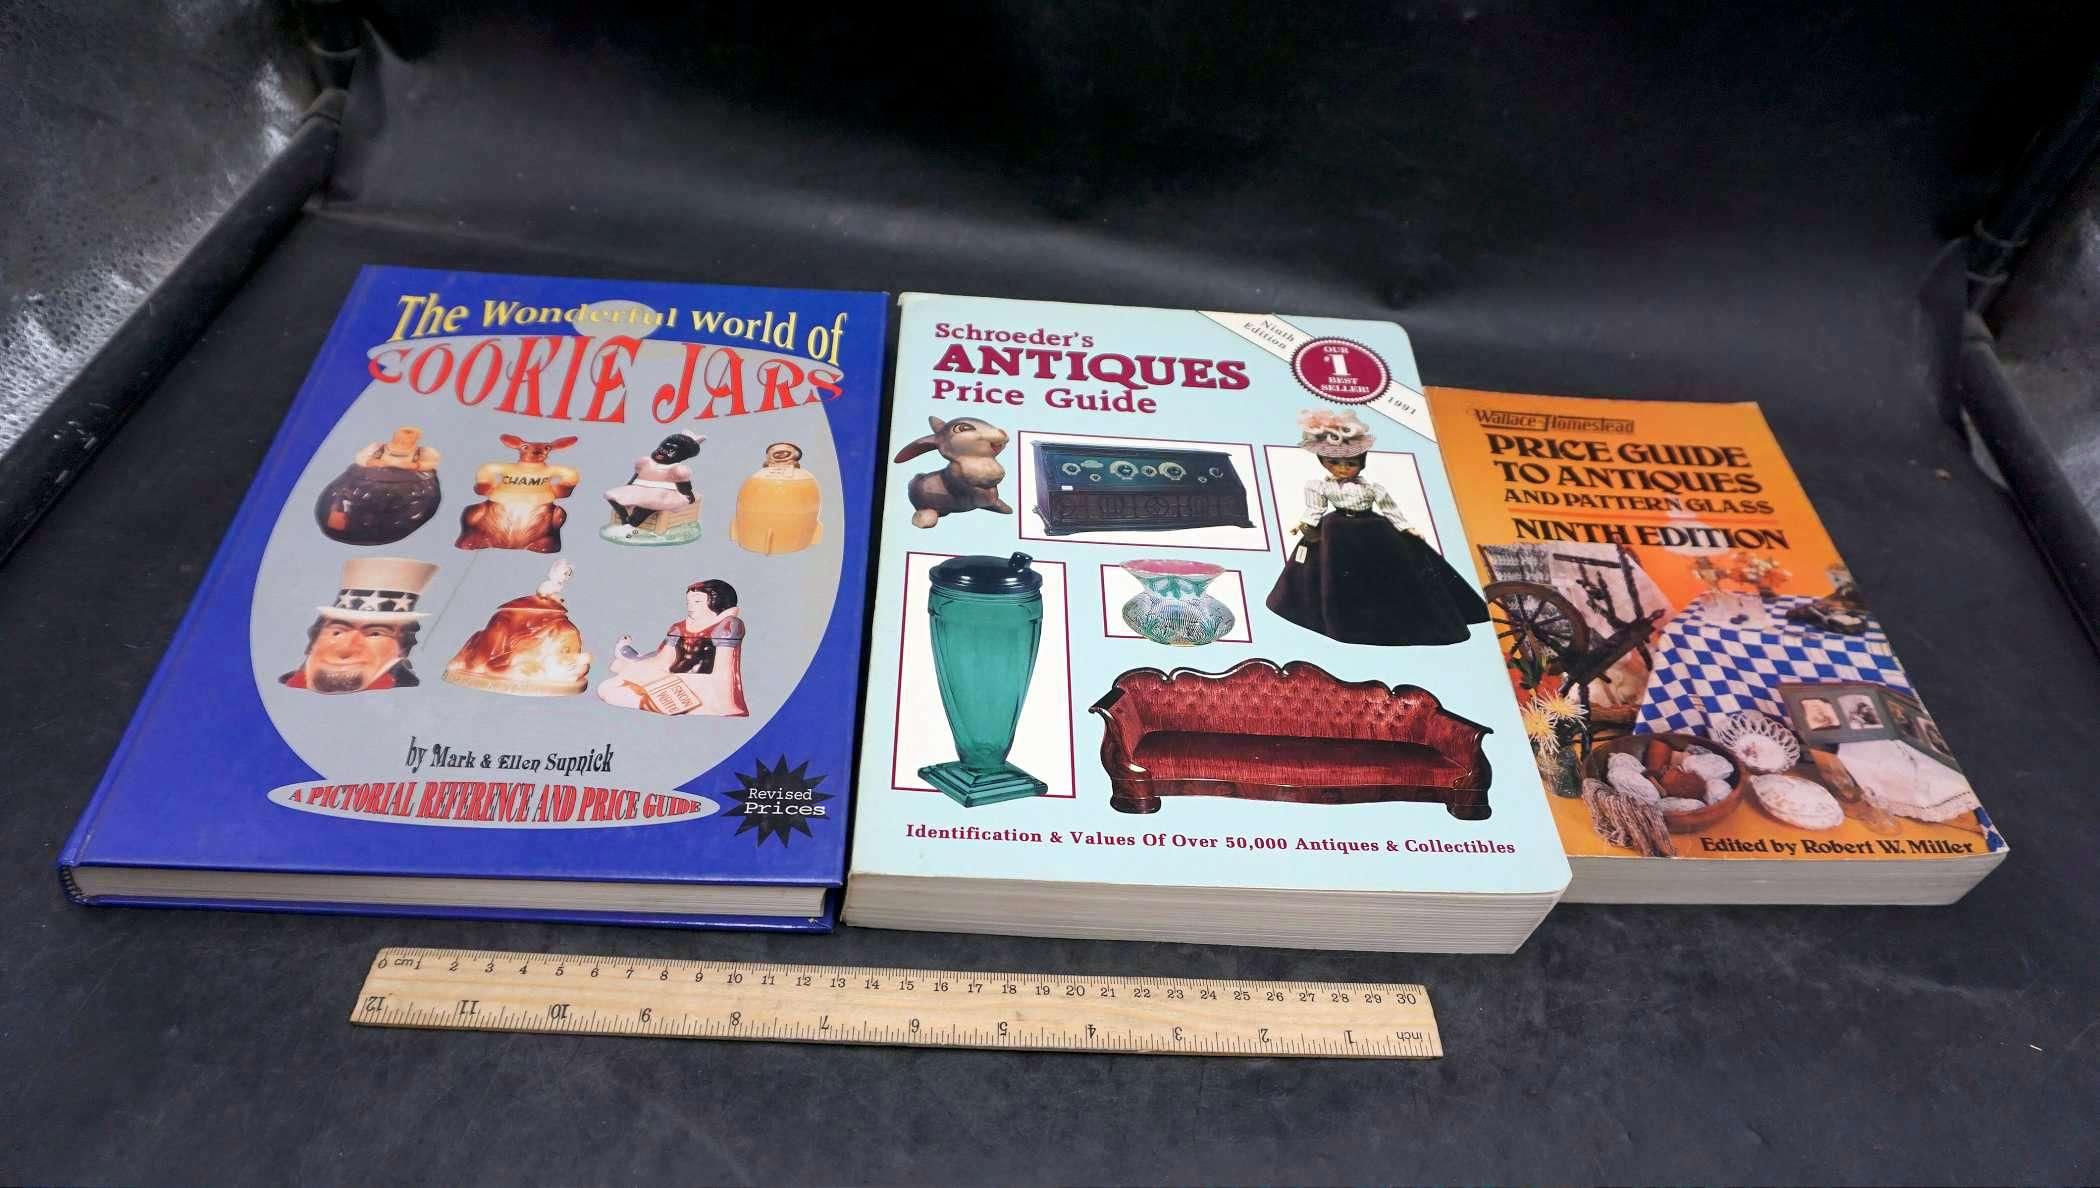 3 Books - Cookie Jars, Antiques Price Guide & Price Guide To Antiques